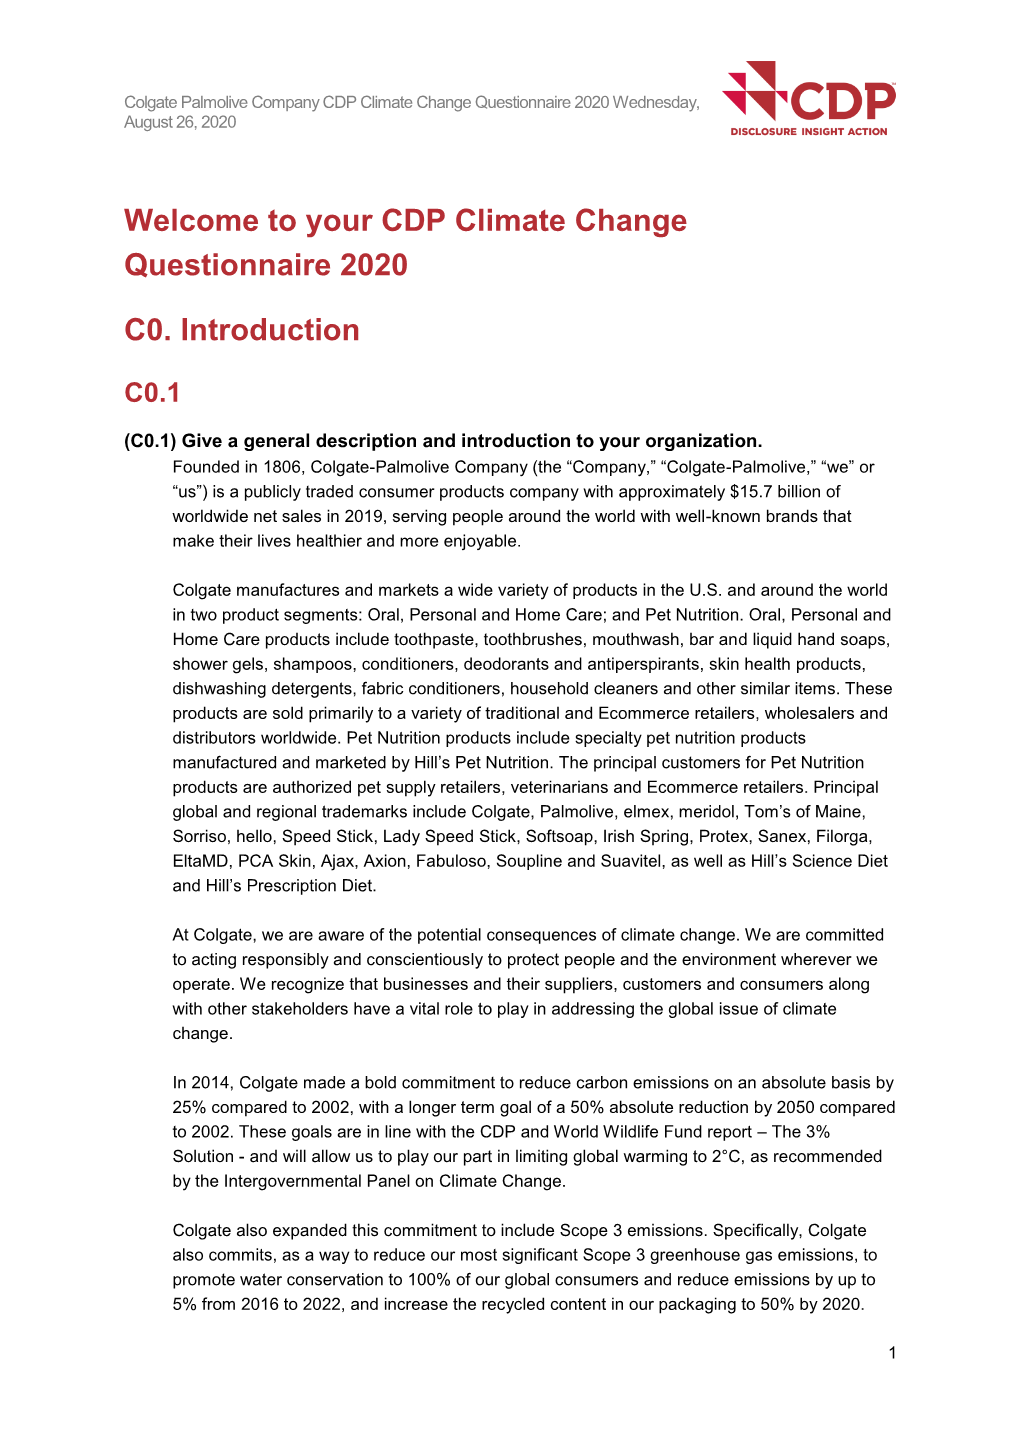 Welcome to Your CDP Climate Change Questionnaire 2020